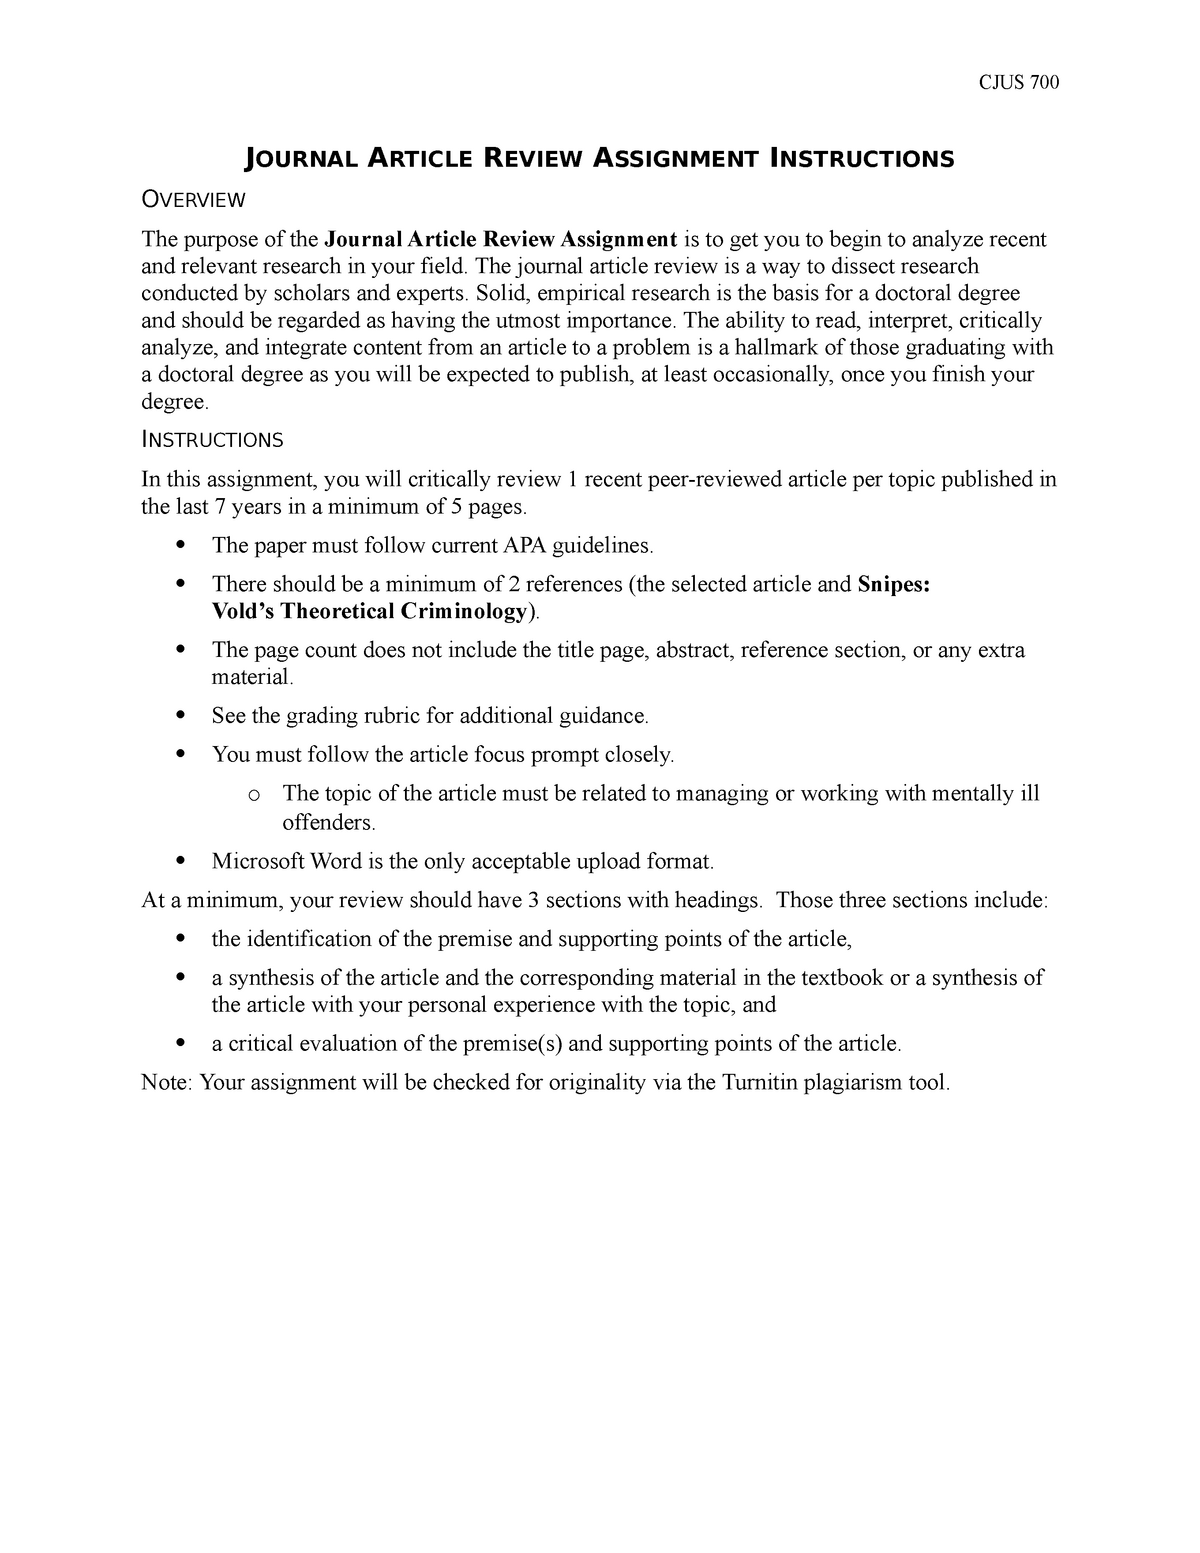 example of journal article review assignment